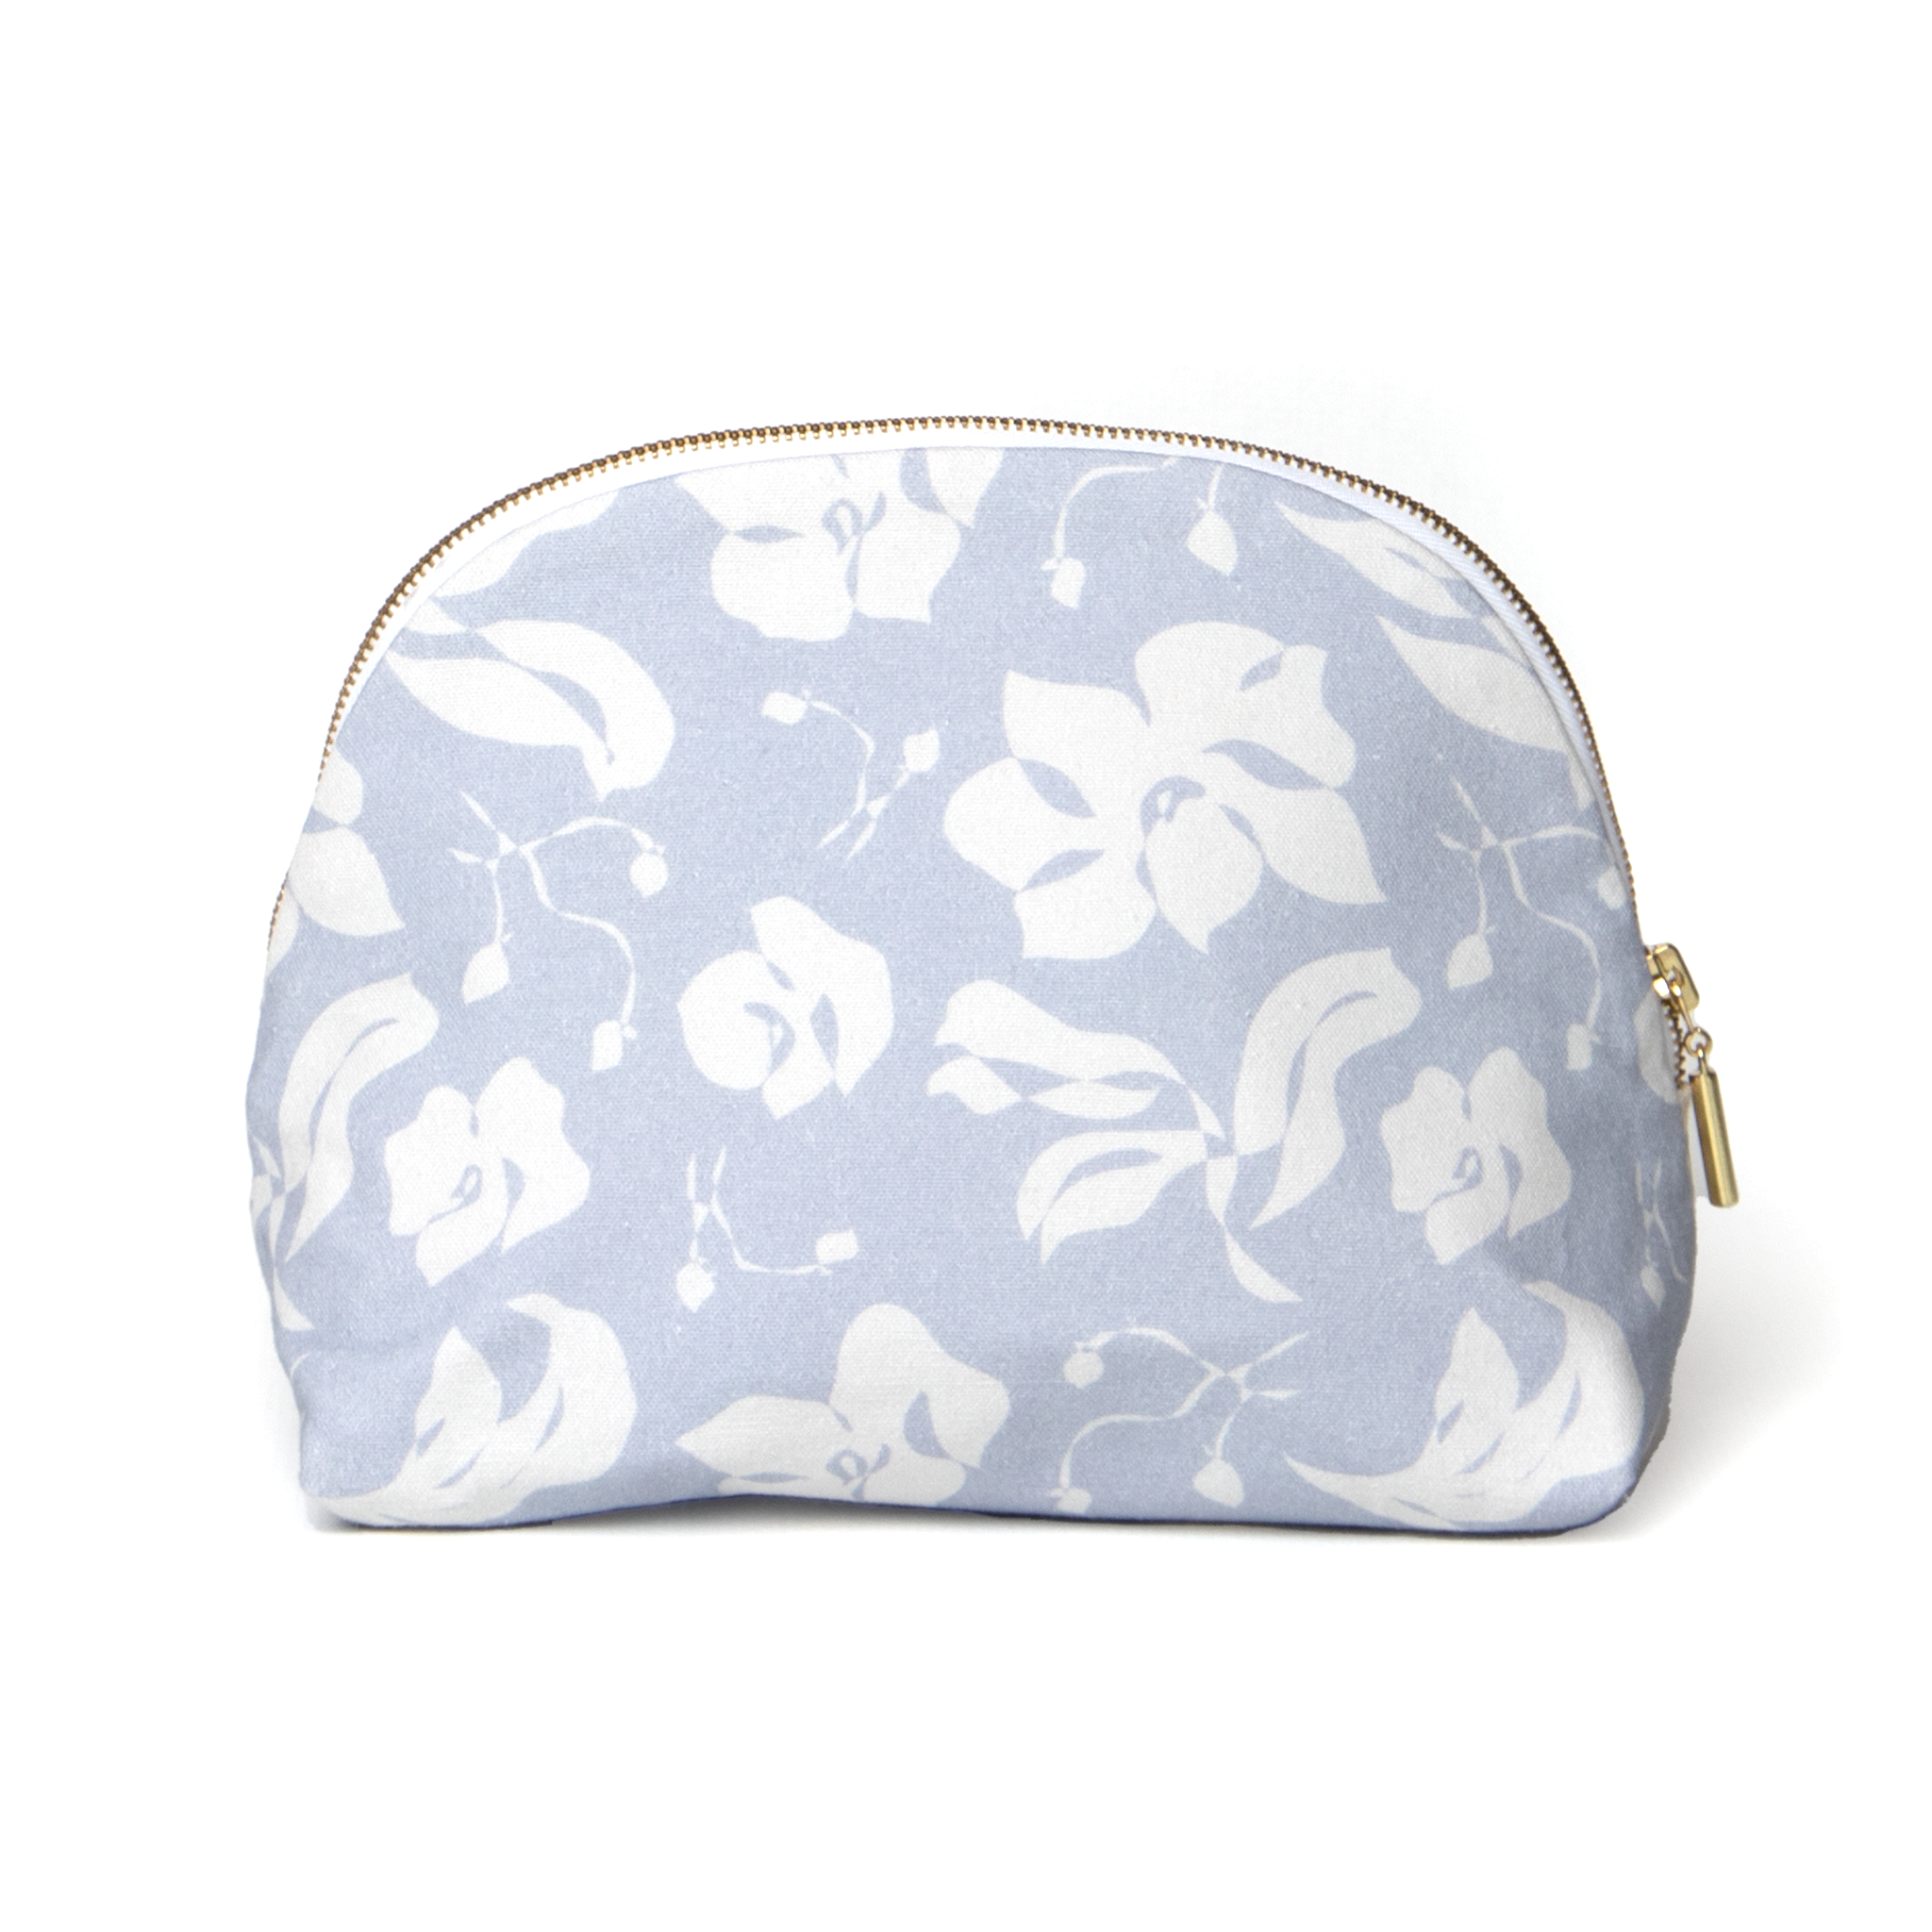 Cornflower Blue Floral Printed Pouch with gold zipper